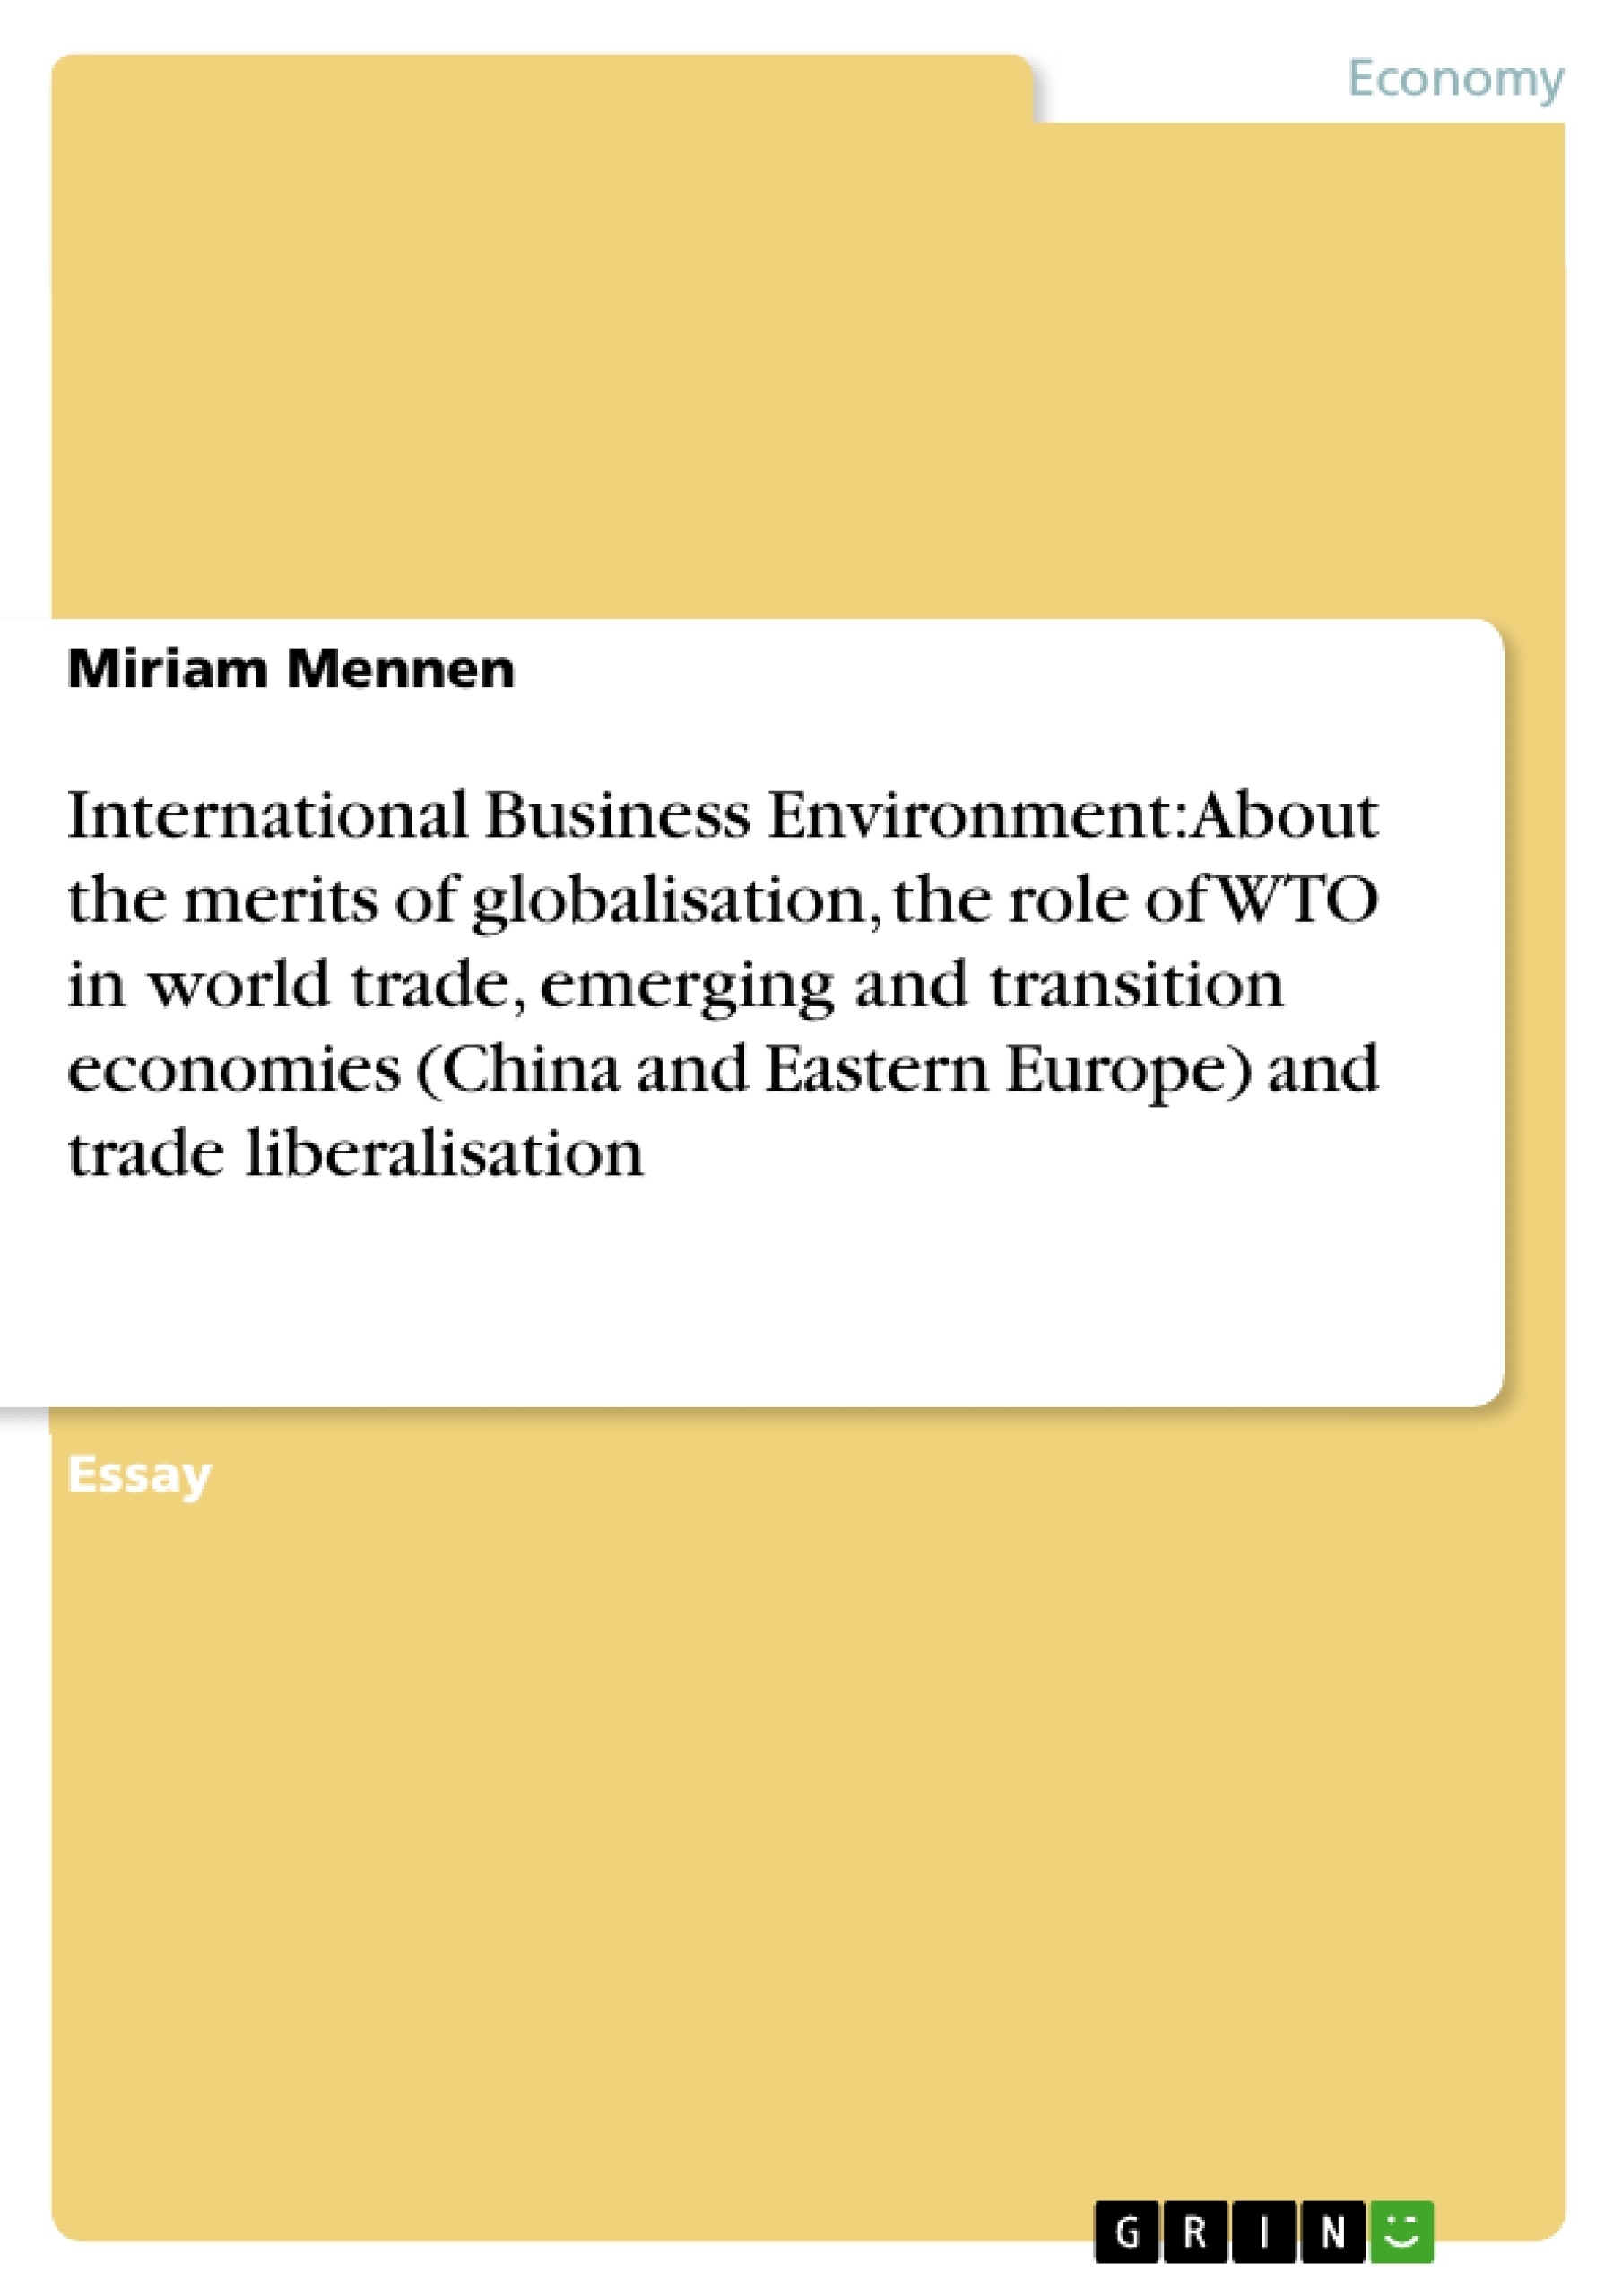 Title: International Business Environment: About the merits of globalisation, the role of WTO in world trade, emerging and transition economies (China and Eastern Europe) and trade liberalisation